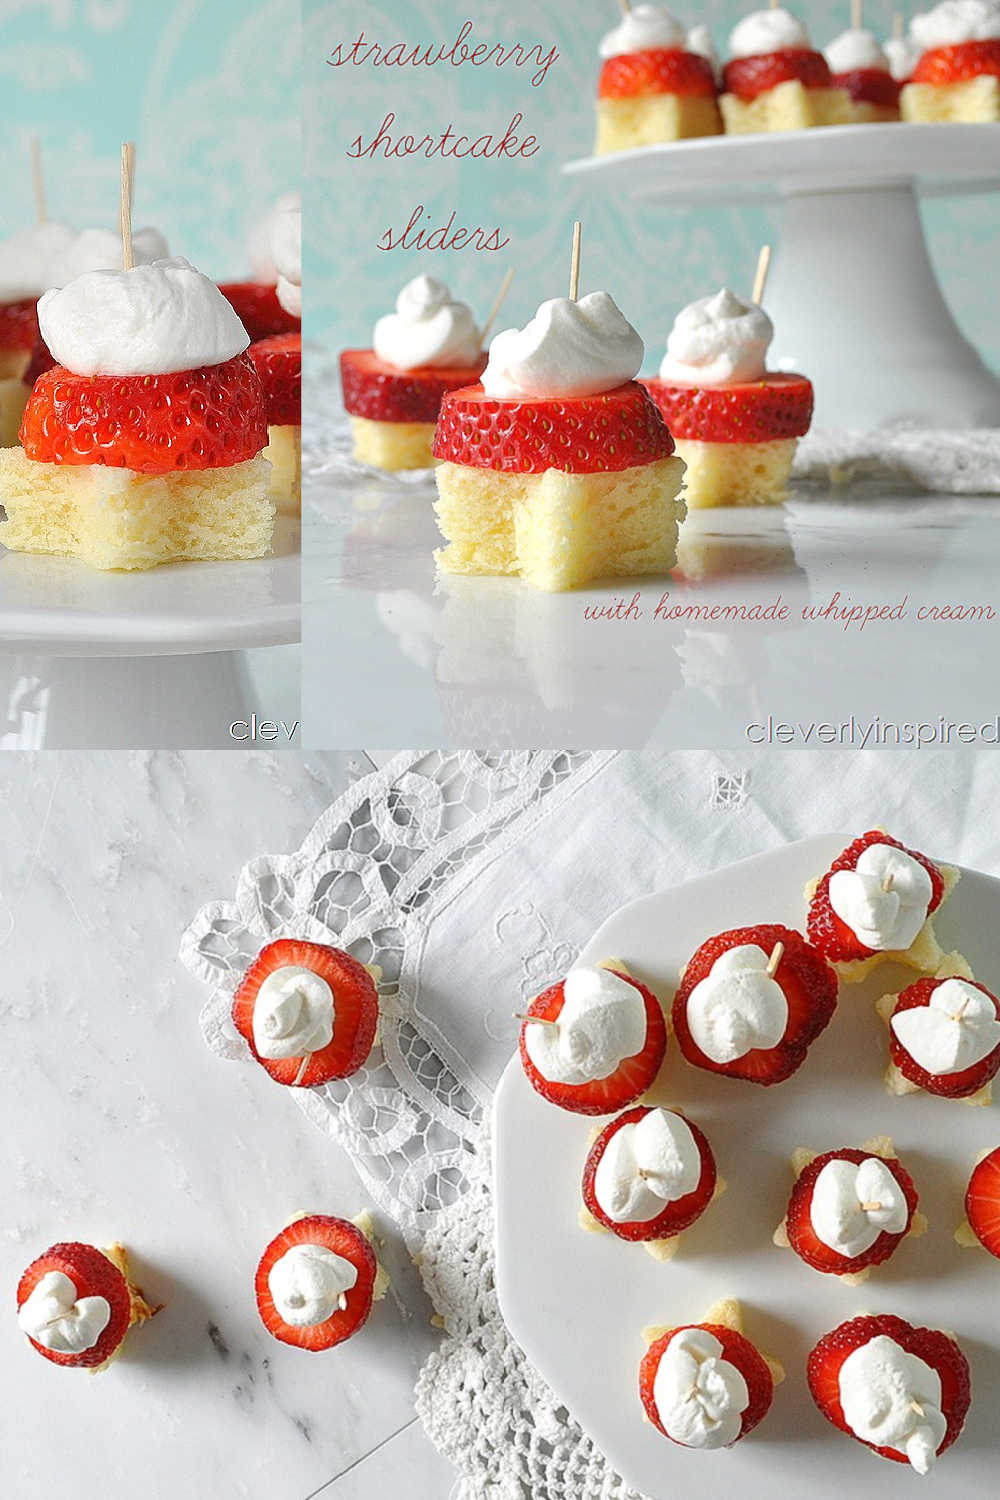 Strawberry Shortcake Sliders. Take the summer classic strawberry shortcake and transform it into bite-sized sliders that are perfect for barbeques and parties! 